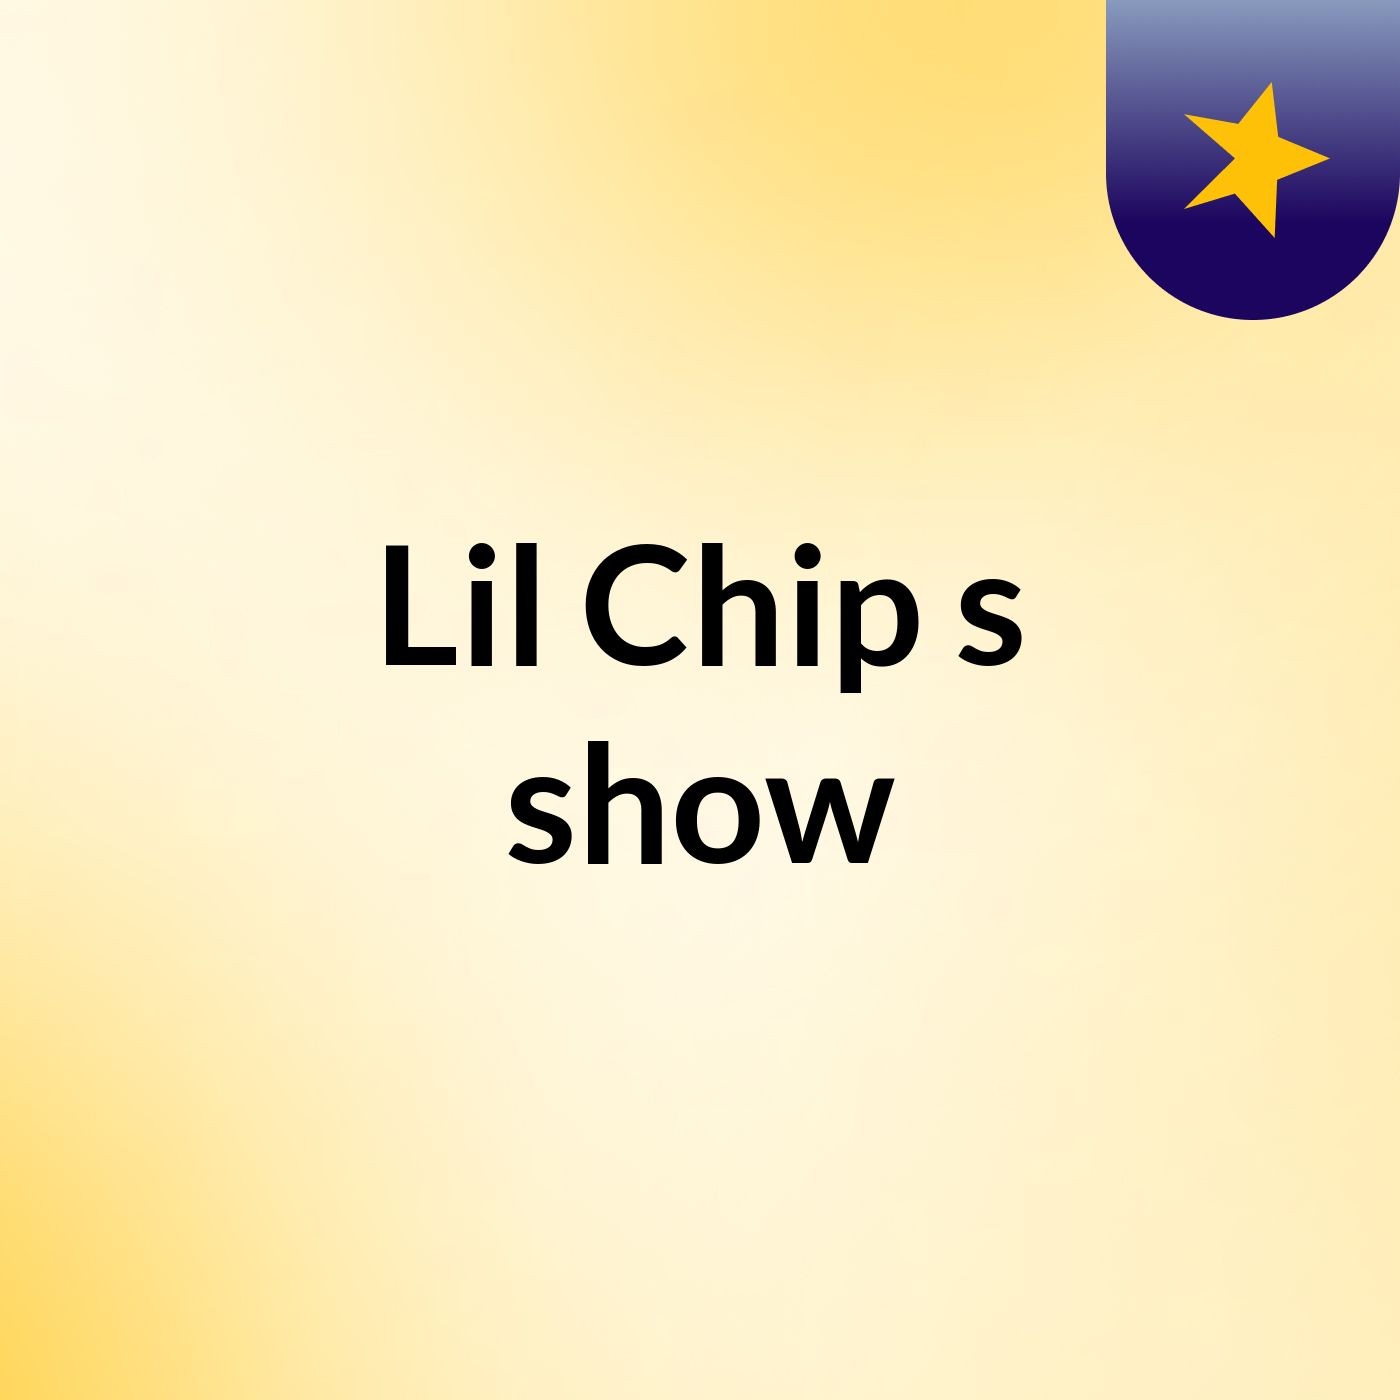 Lil Chip's show